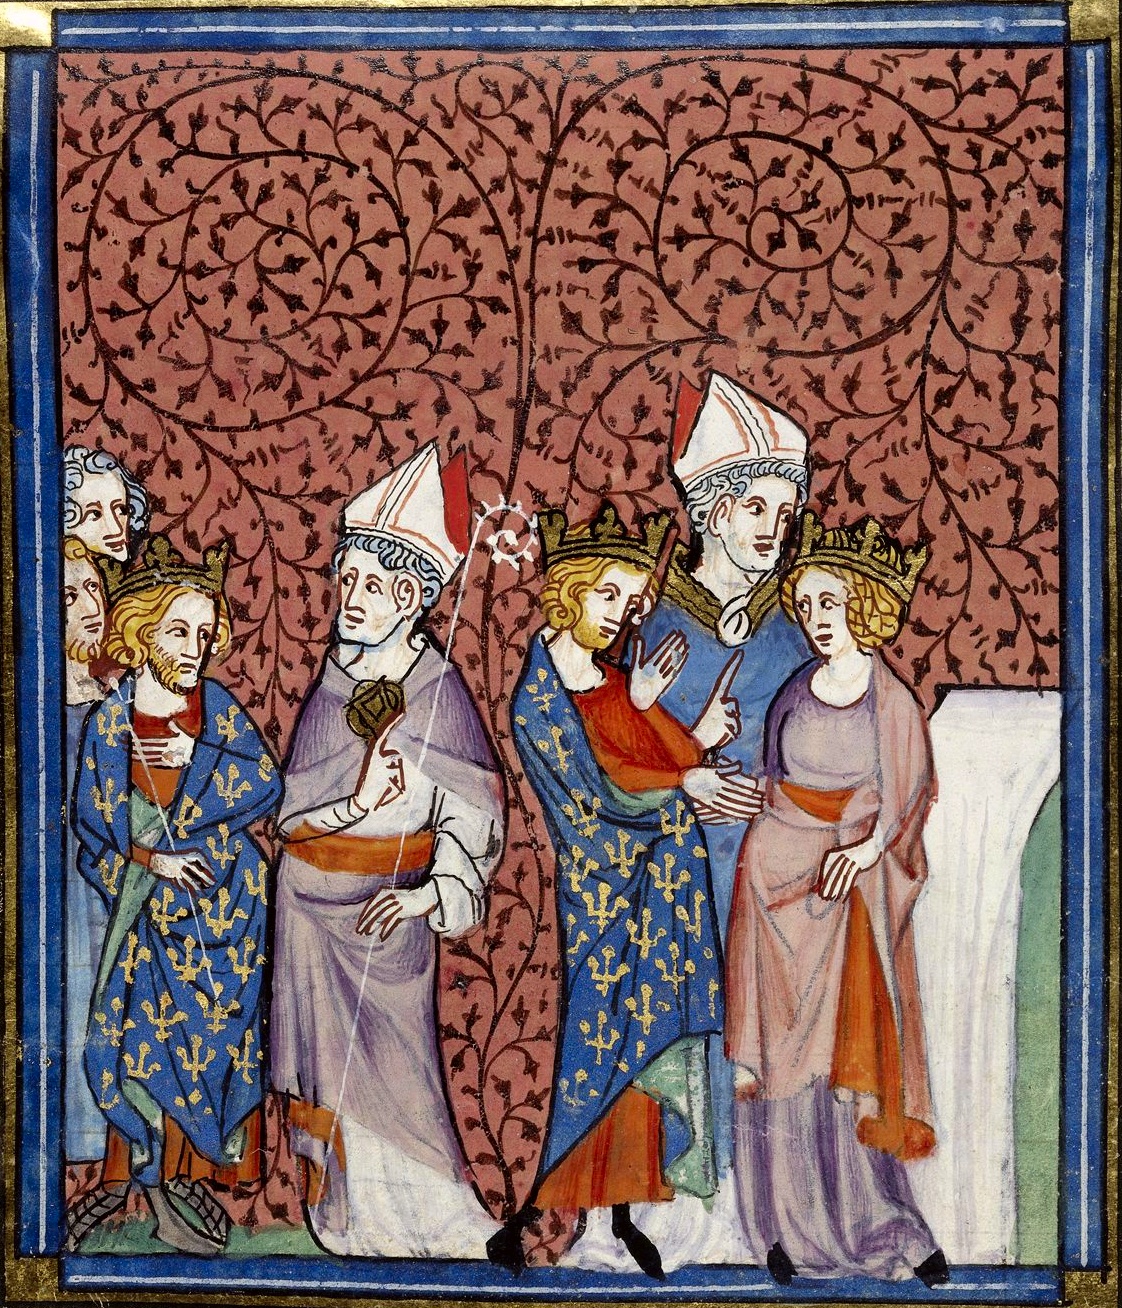 Henry I of France marries Anna of Kiev.